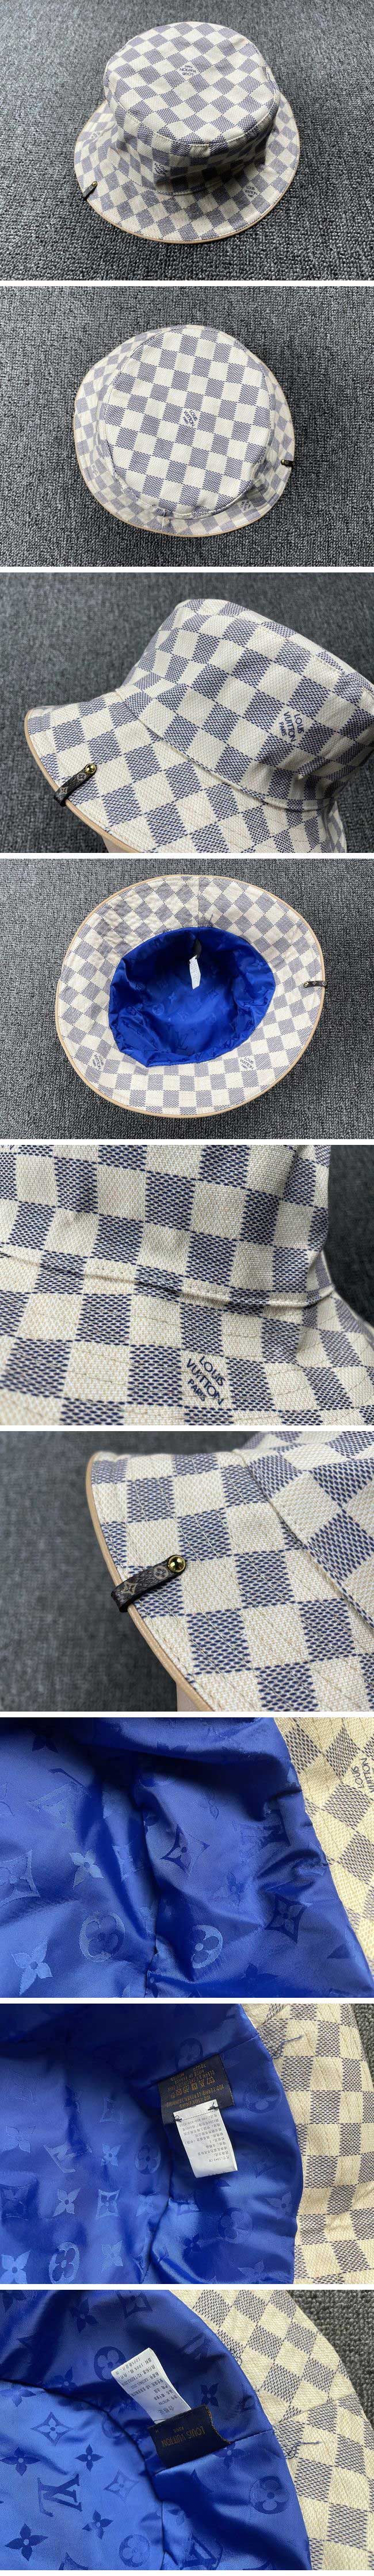 Louis Vuitton White Damie Bucket Hat ルイヴィトン ホワイト ダミエ バケット ハット M 58cm